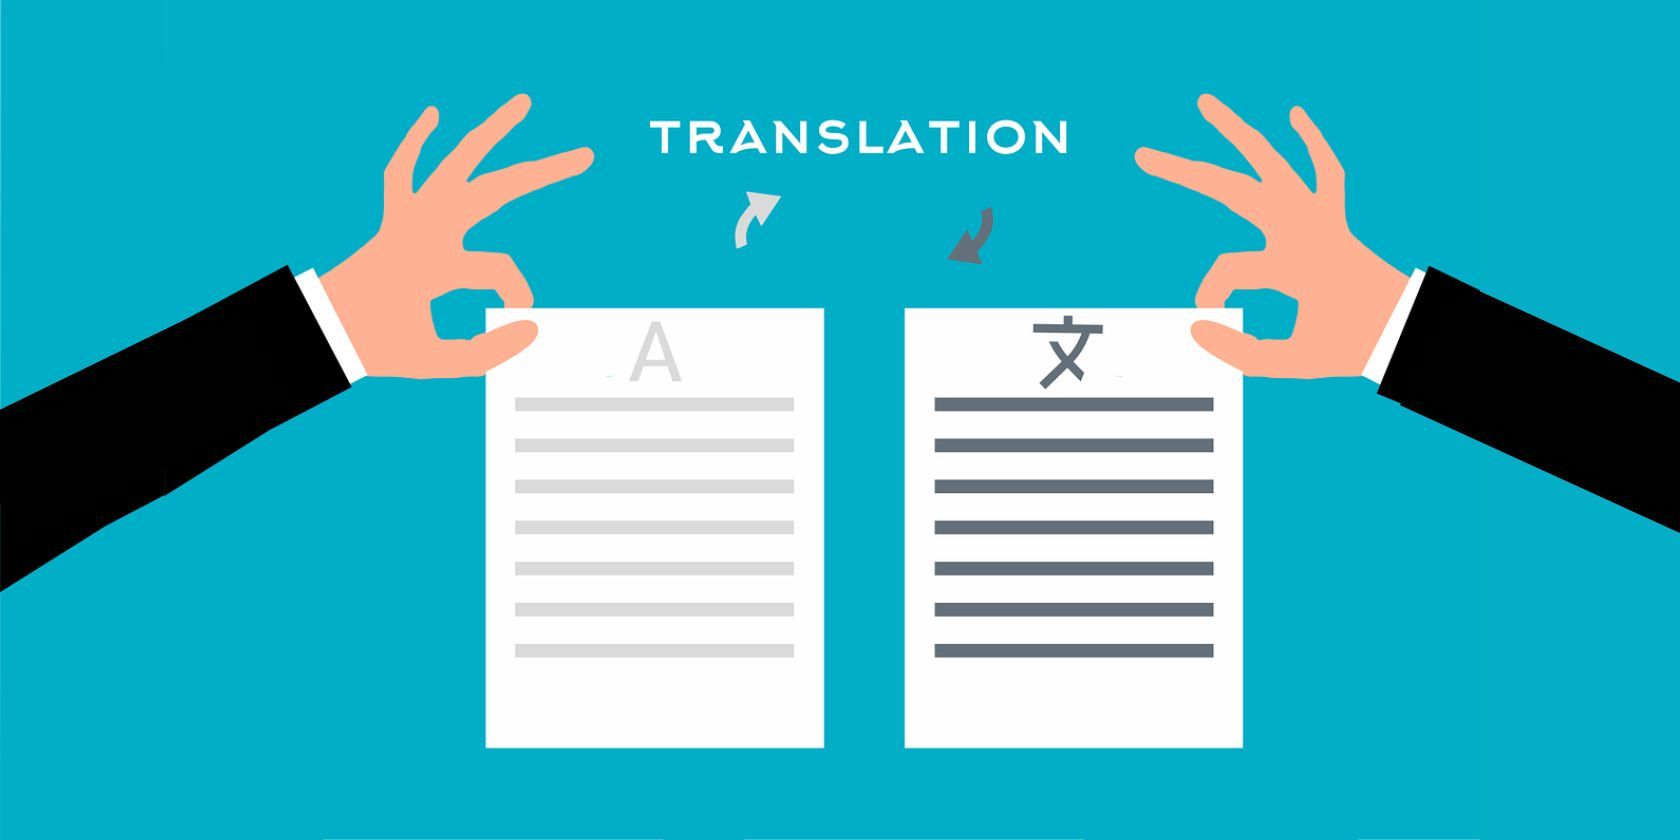 An illustration showing two hands, each holding a document in a different language with the word “translation” between them..